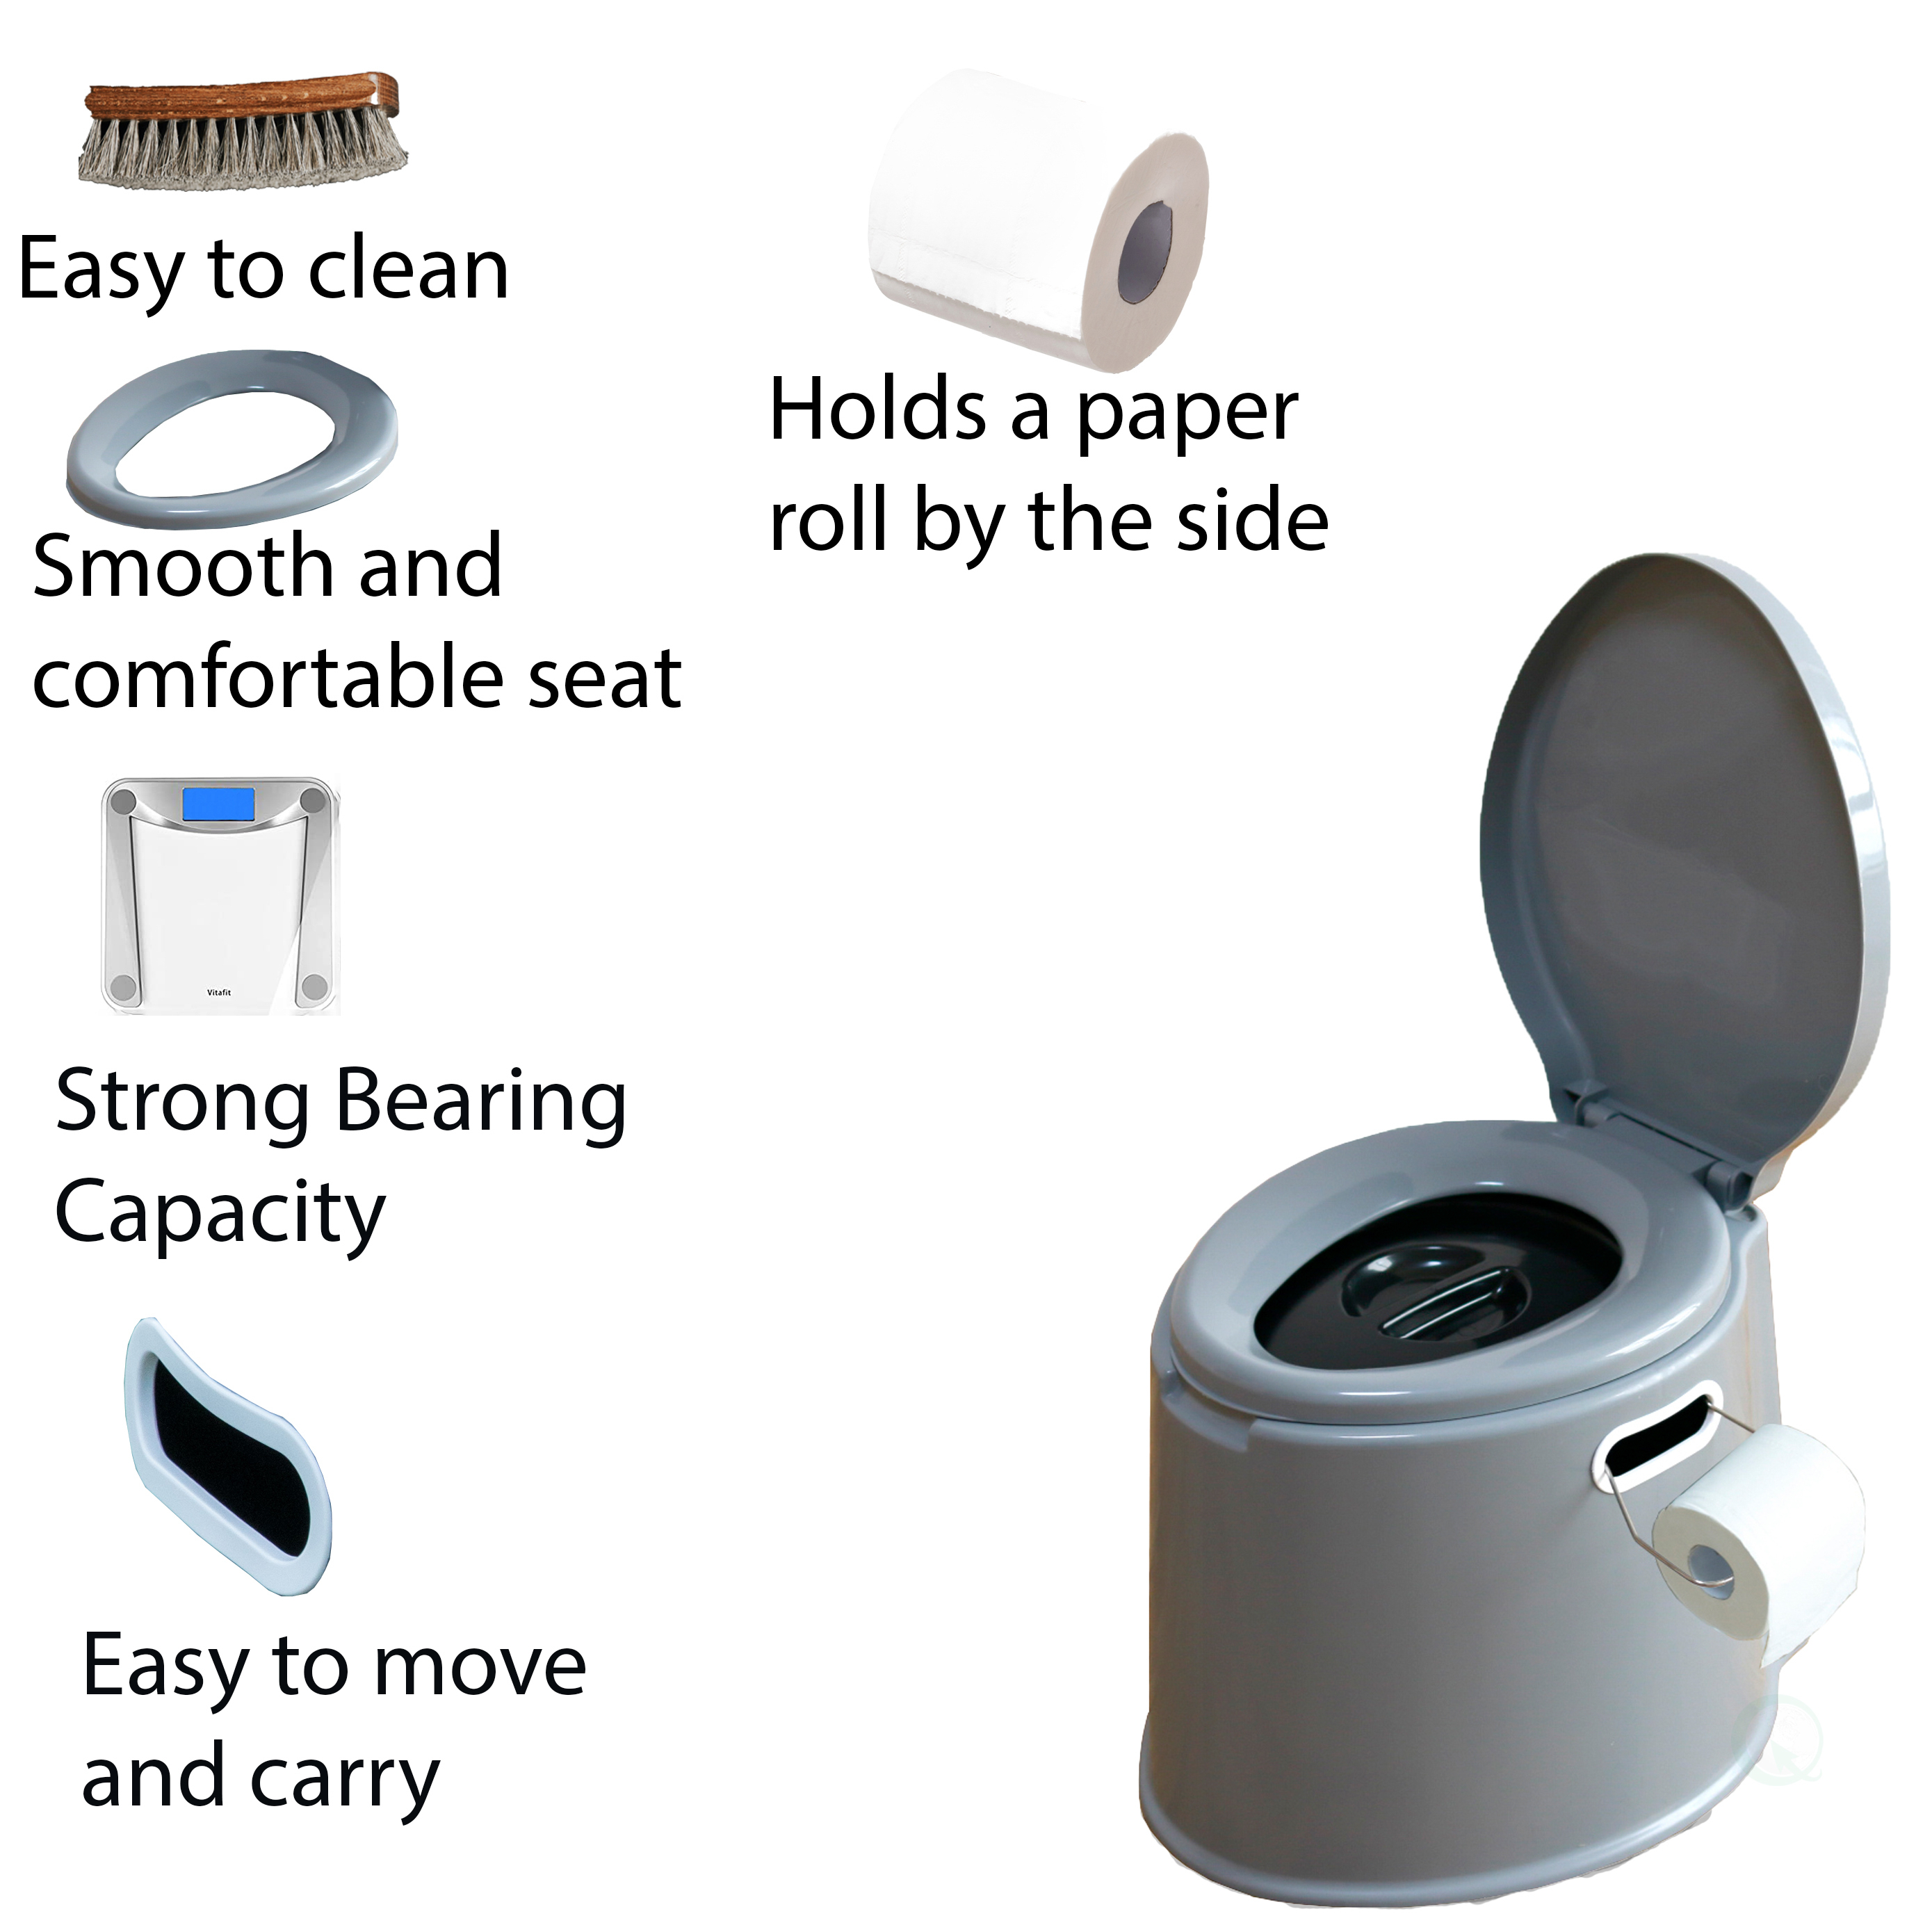 Portable Travel Toilet For Camping And Hiking - Toilet With Case